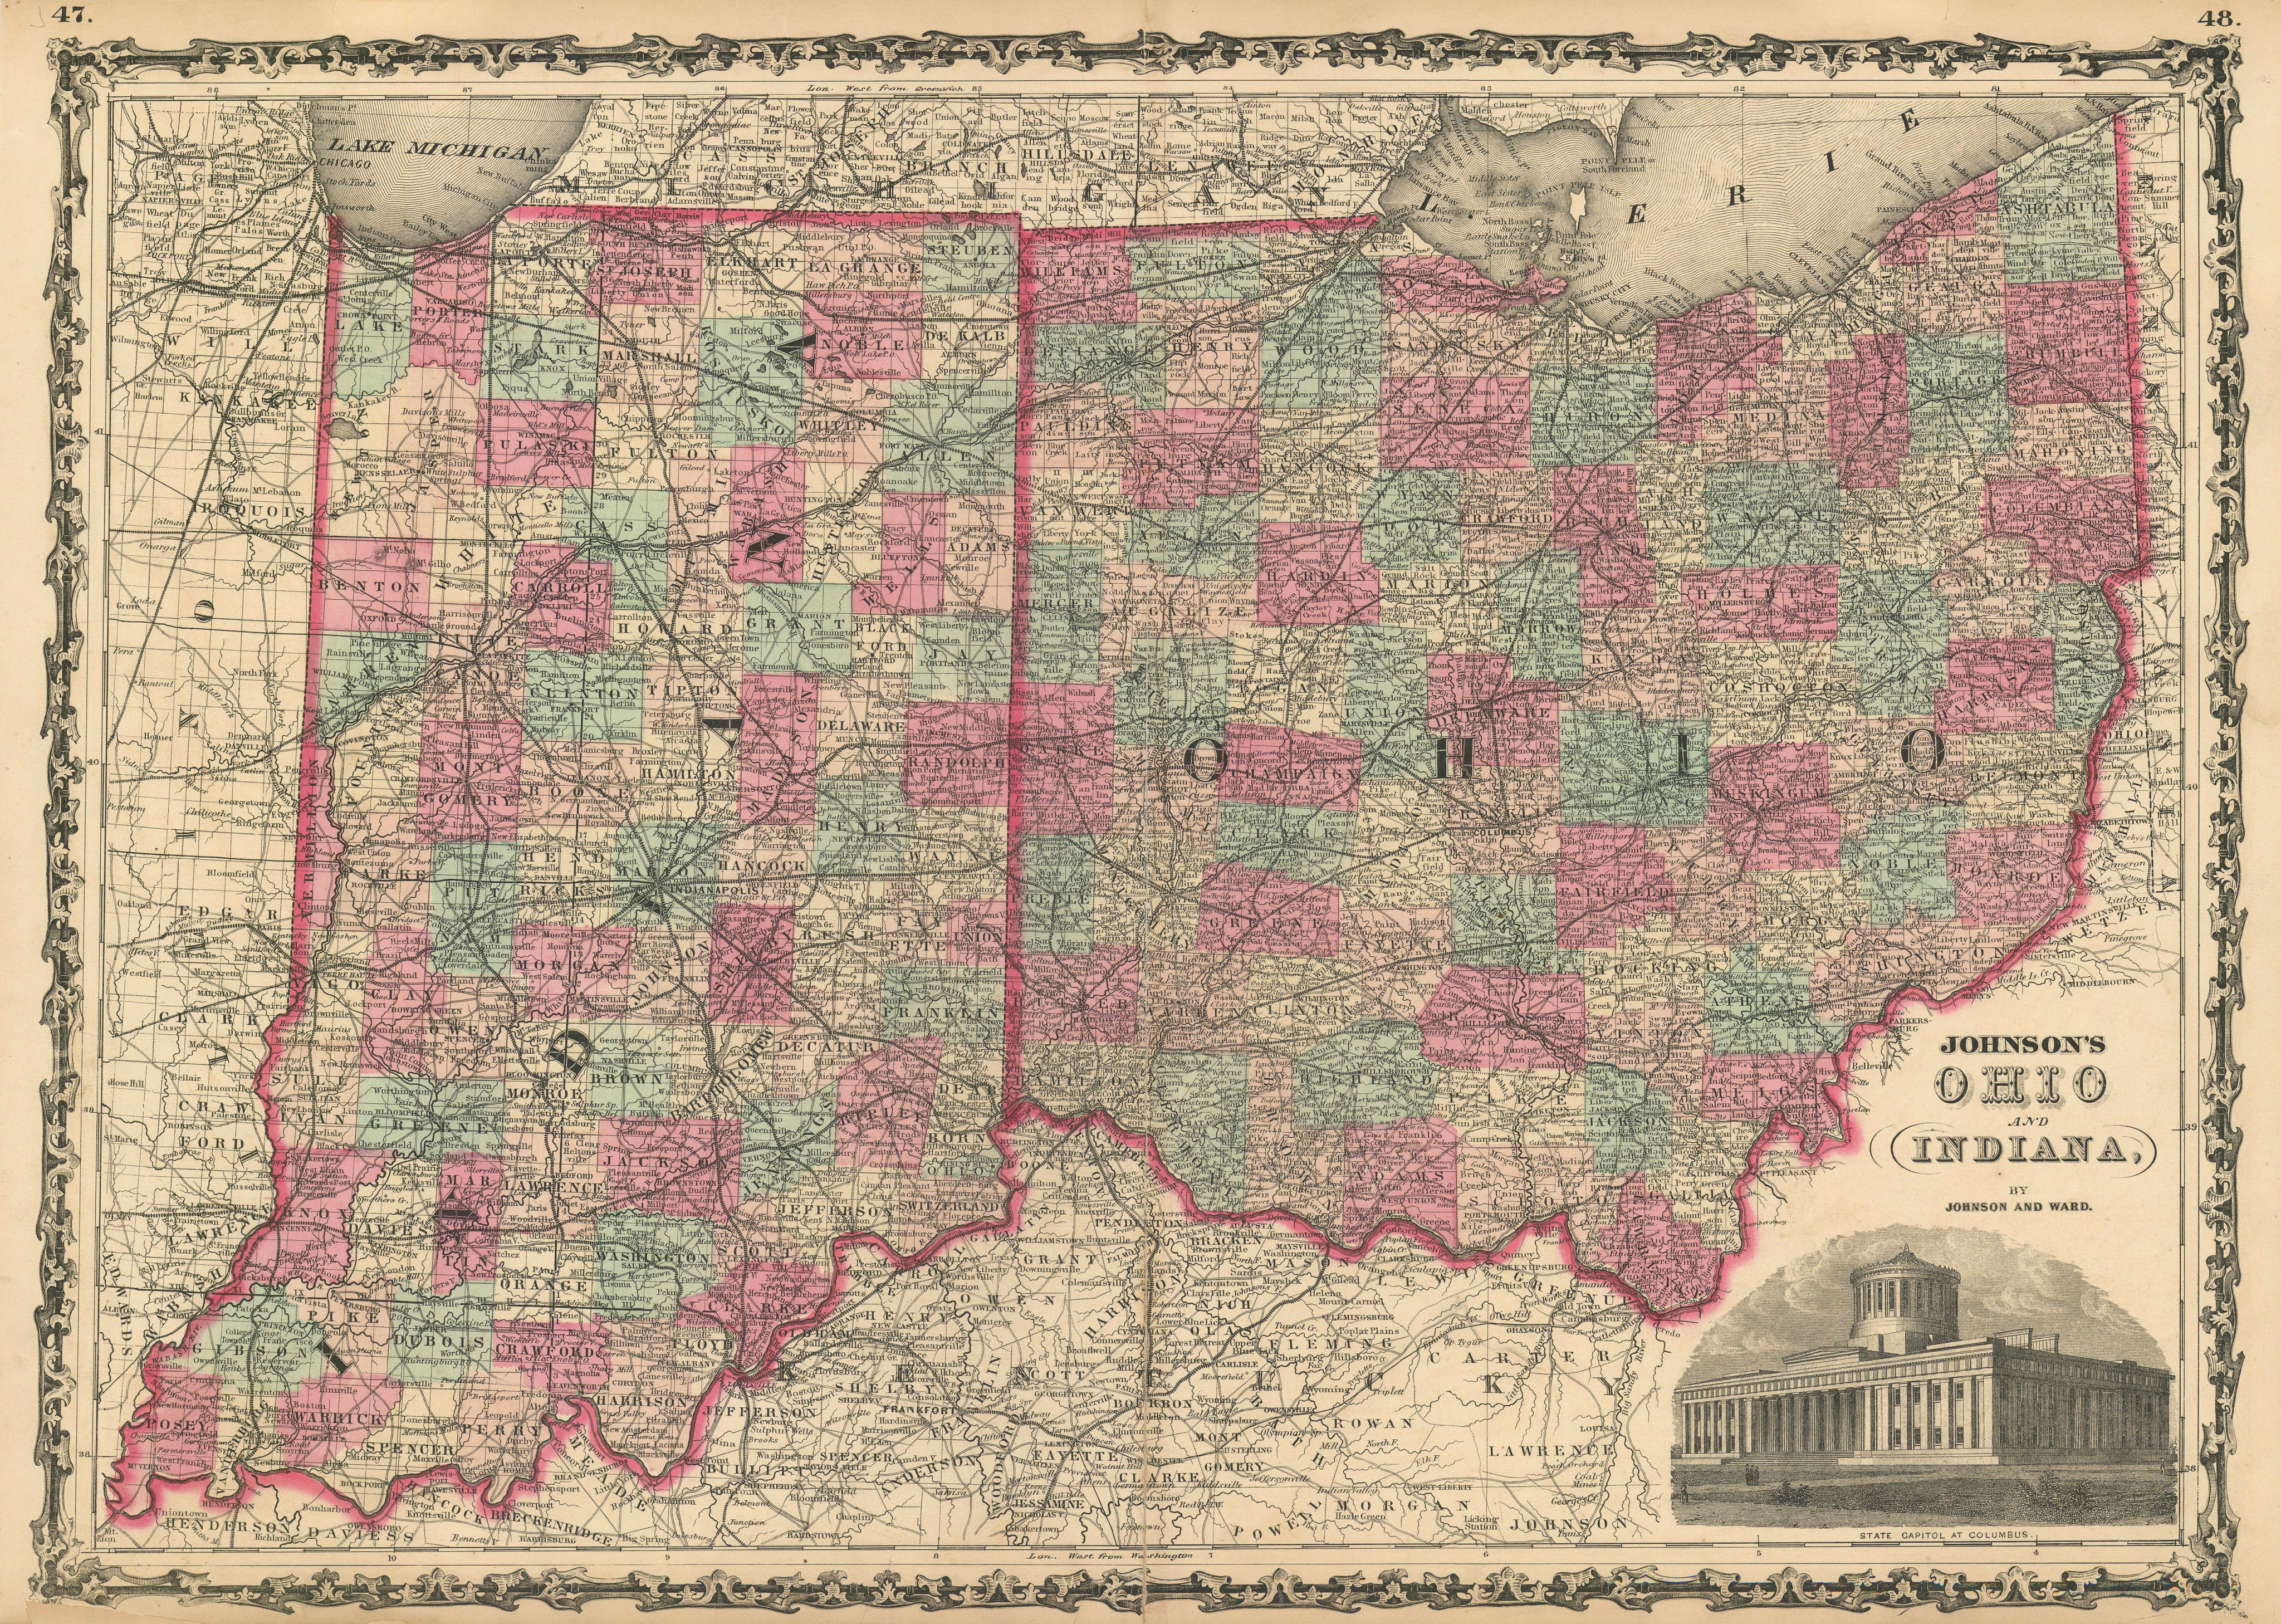 Associate Product Johnson's Ohio & Indiana. US state map showing counties 1862 old antique